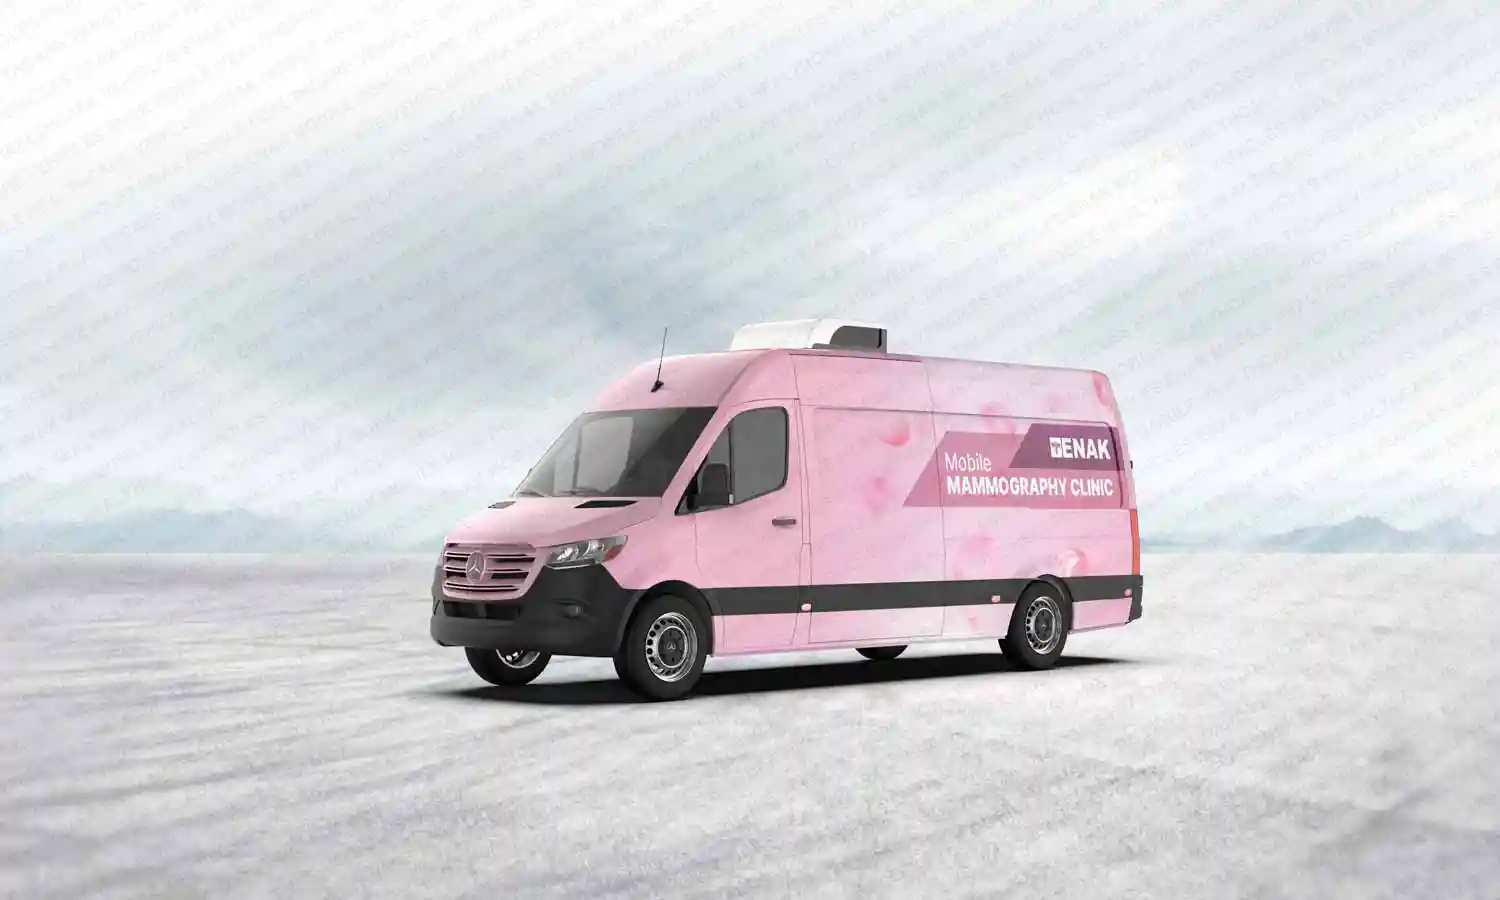 Mobile Mammography Clinic-Vehicle